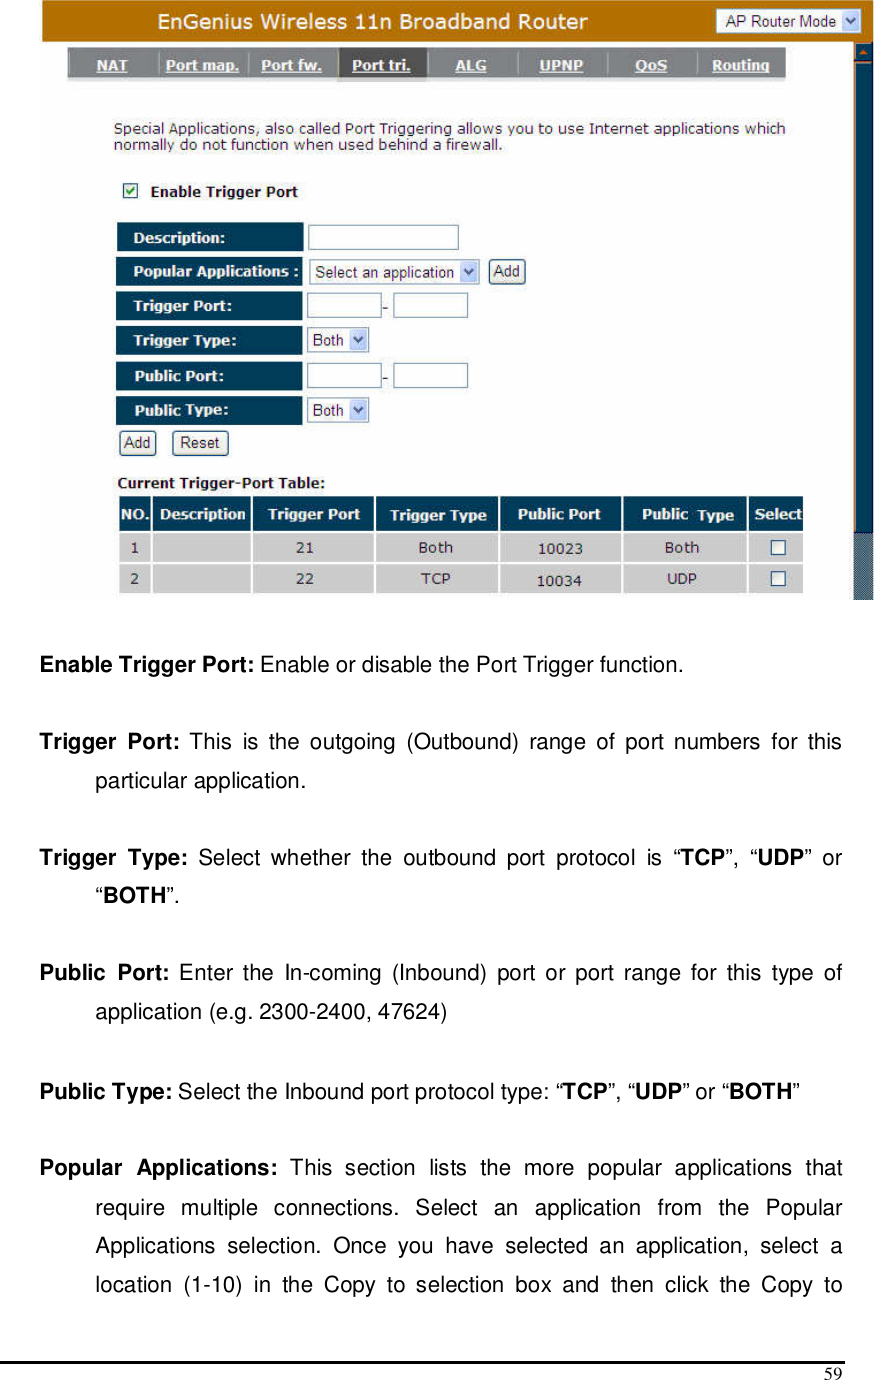  59   Enable Trigger Port: Enable or disable the Port Trigger function.  Trigger  Port:  This  is  the  outgoing  (Outbound)  range  of  port  numbers  for  this particular application.  Trigger  Type:  Select  whether  the  outbound  port  protocol  is  “TCP”,  “UDP”  or “BOTH”.  Public  Port:  Enter  the  In-coming  (Inbound)  port  or  port range  for  this  type  of application (e.g. 2300-2400, 47624)   Public Type: Select the Inbound port protocol type: “TCP”, “UDP” or “BOTH”  Popular  Applications:  This  section  lists  the  more  popular  applications  that require  multiple  connections.  Select  an  application  from  the  Popular Applications  selection.  Once  you  have  selected  an  application,  select  a location  (1-10)  in  the  Copy  to  selection  box  and  then  click  the  Copy  to 